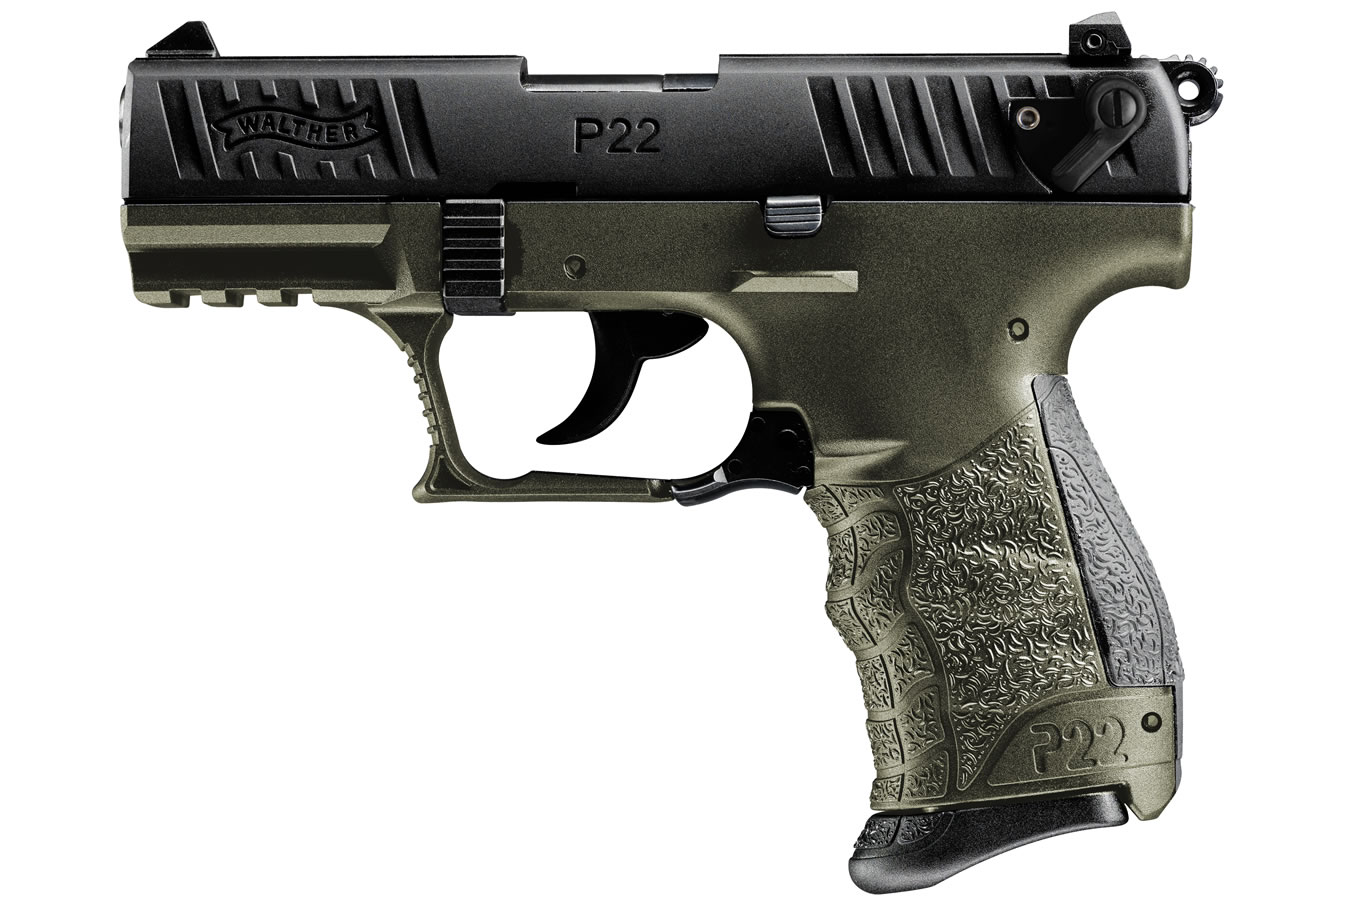 No. 7 Best Selling: WALTHER P22Q SPORT MILITARY 22LR